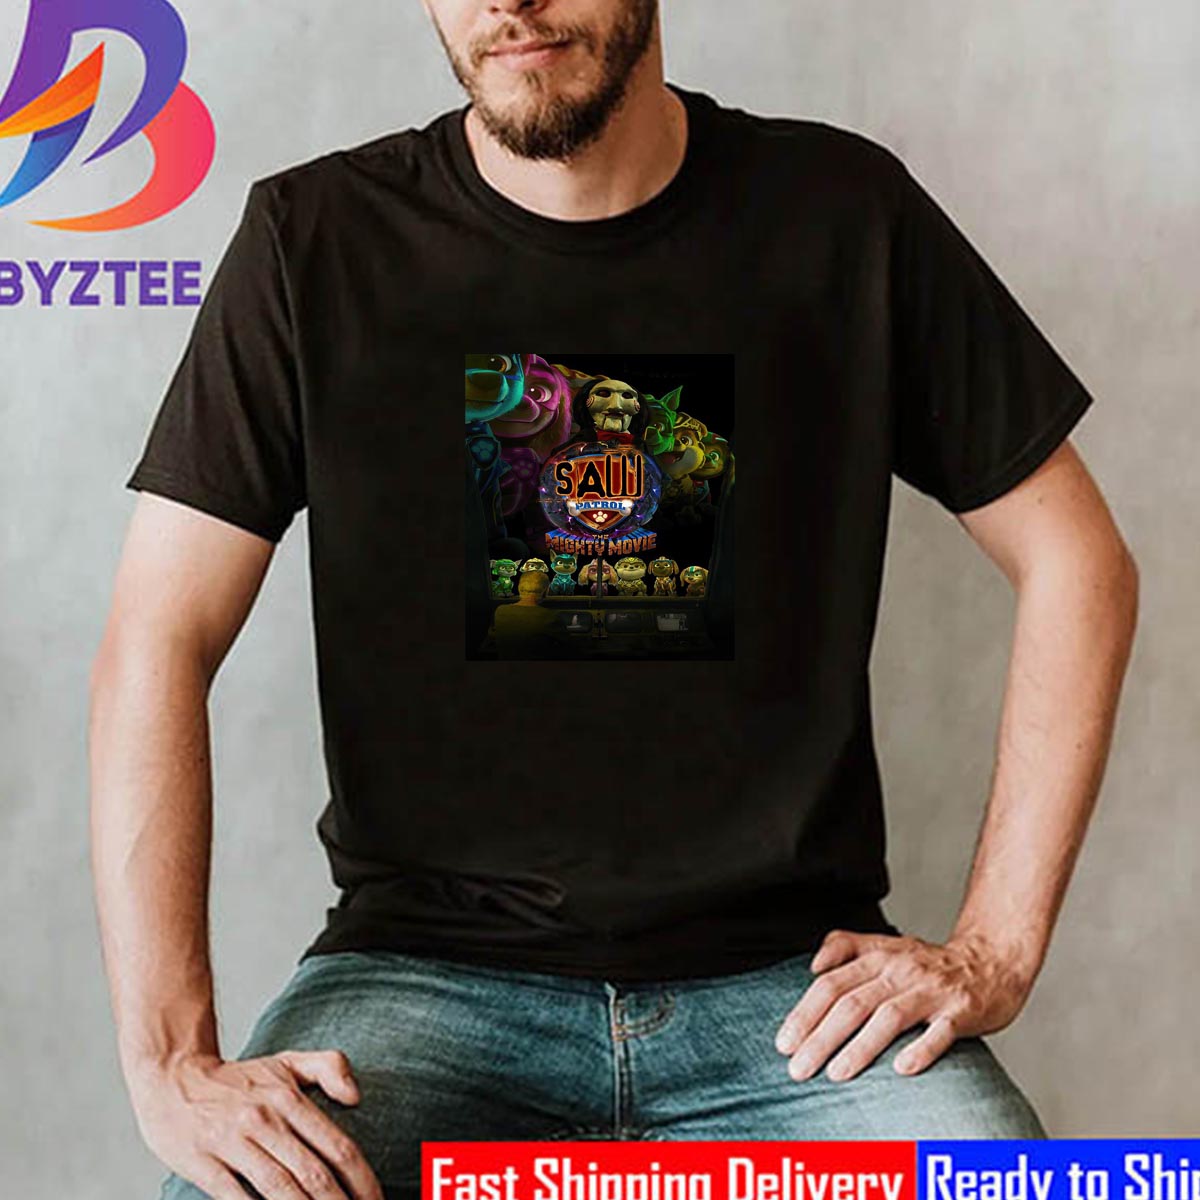 Saw X collab Paw T-Shirt Movie Classic Mighty - The Patrol Byztee Poster